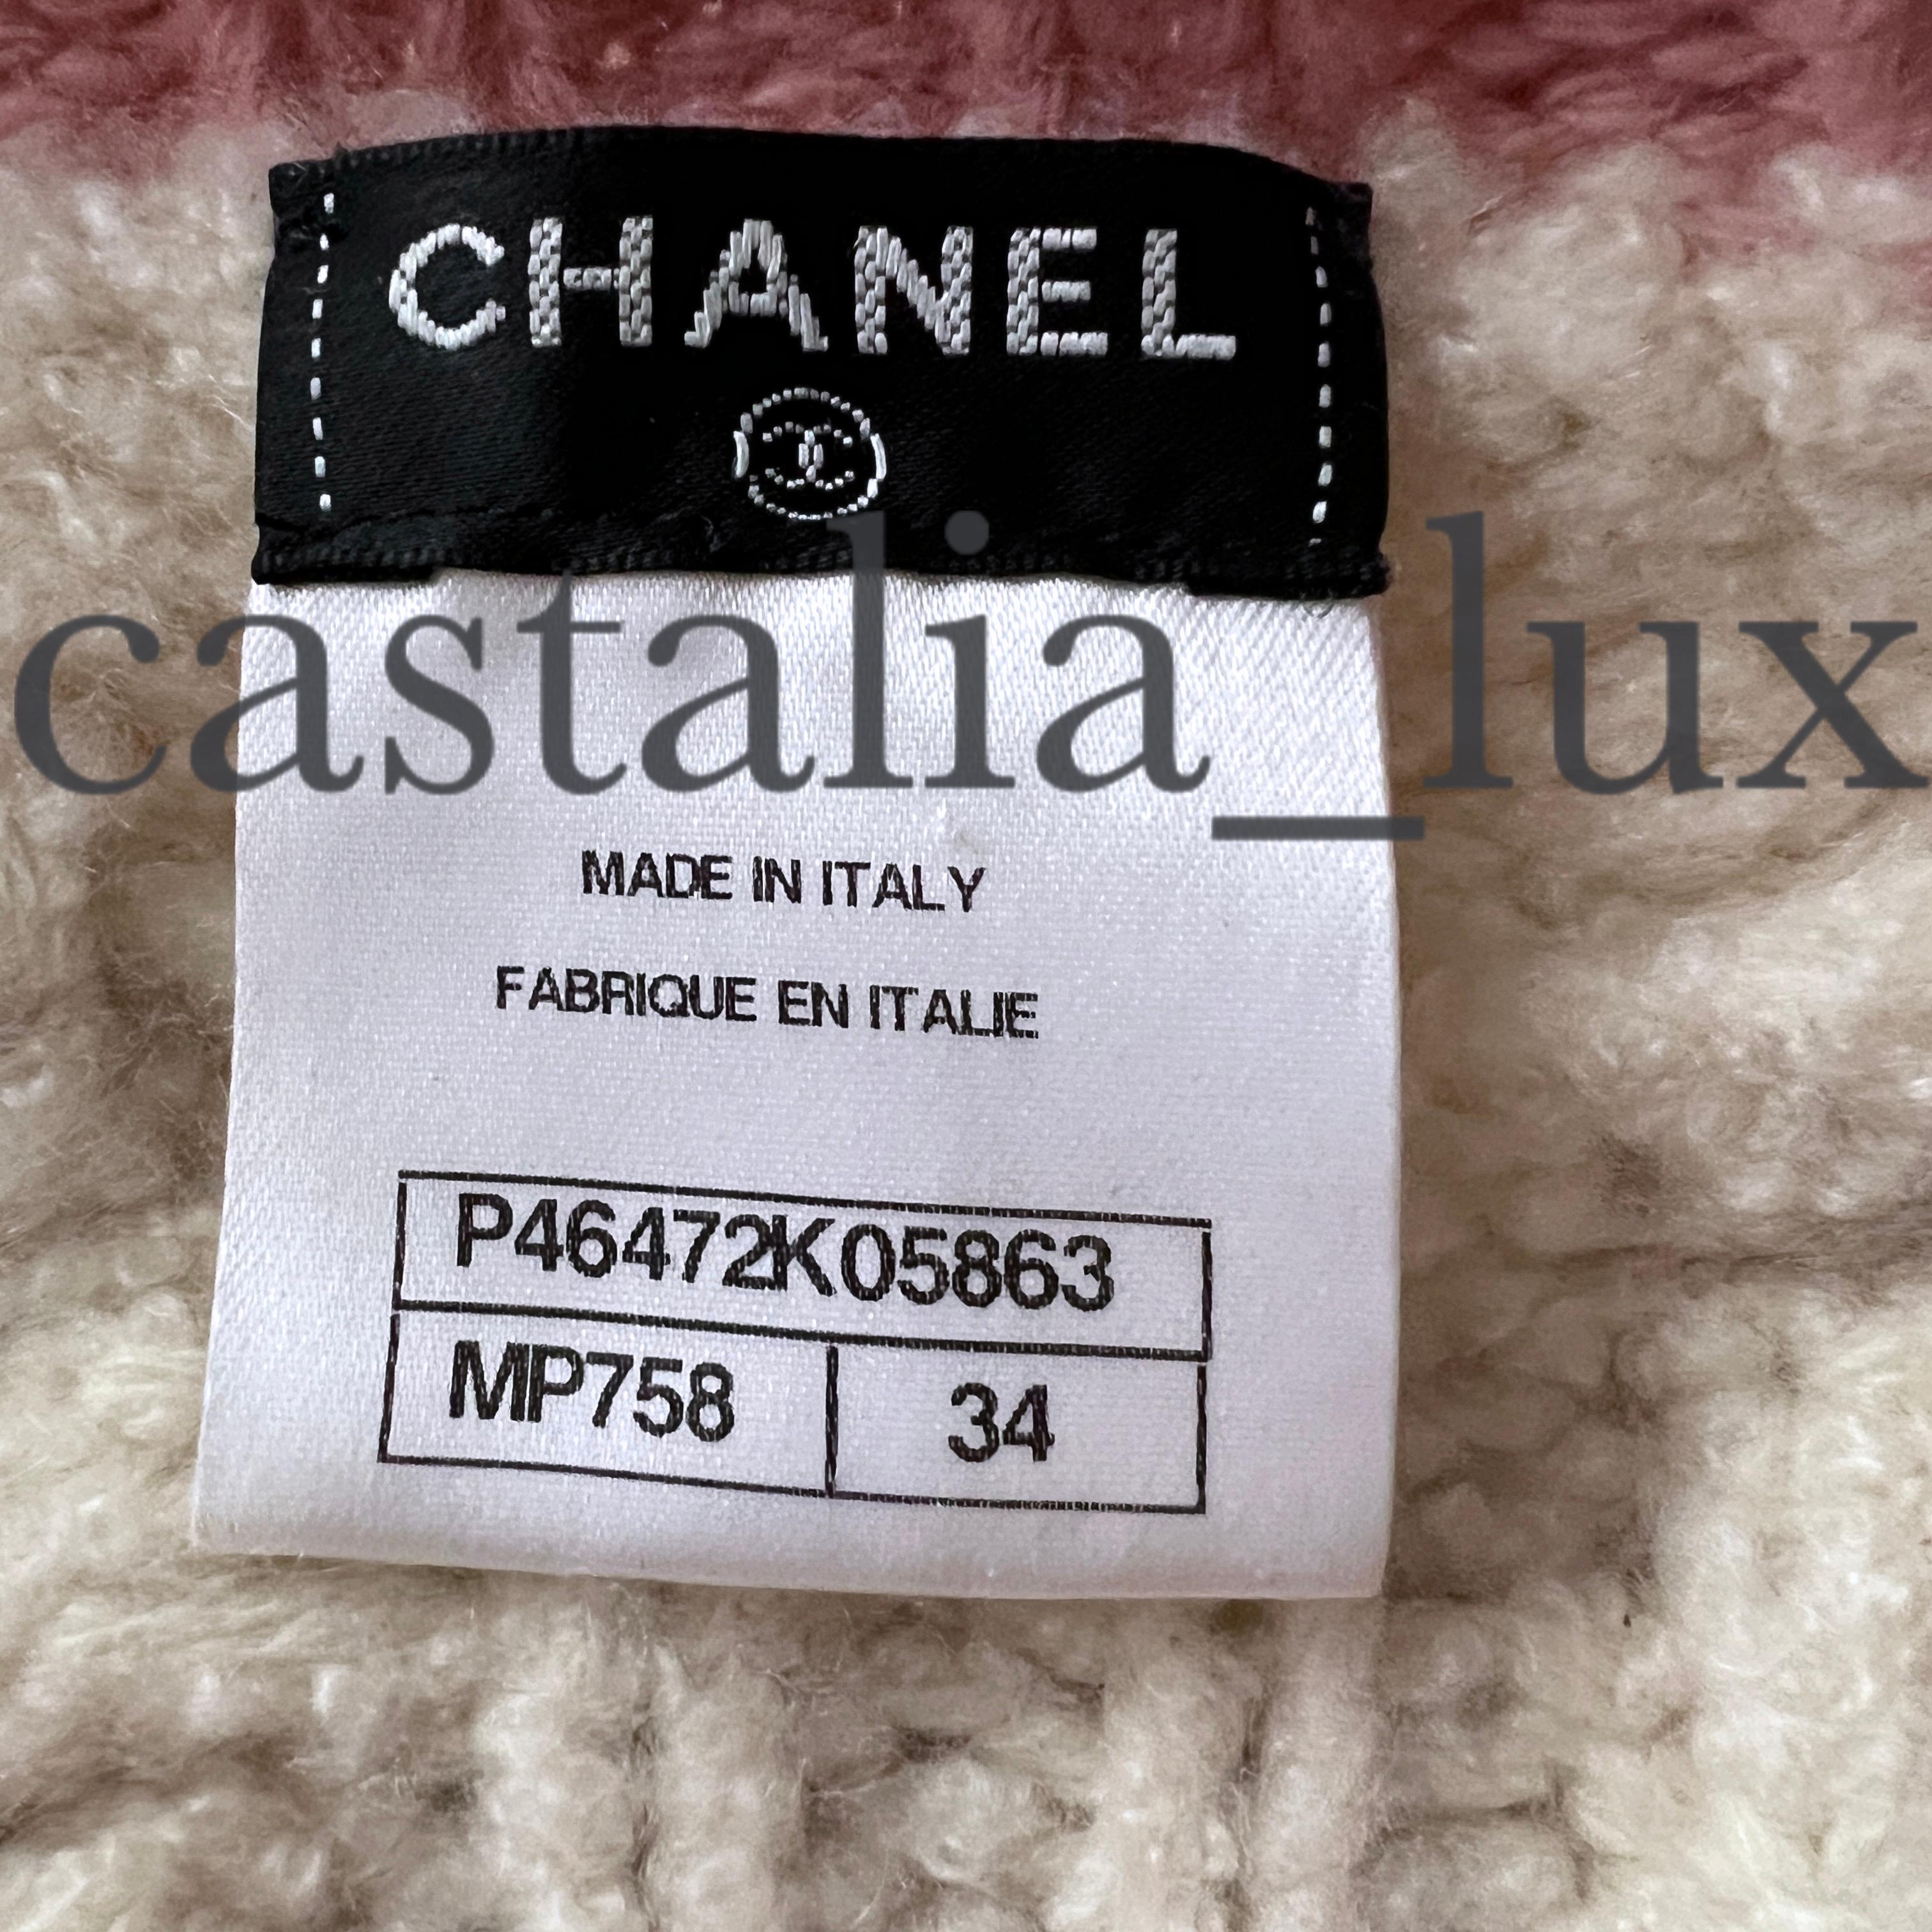 Chanel Edinburgh Collection Teddy Pullover For Sale 9